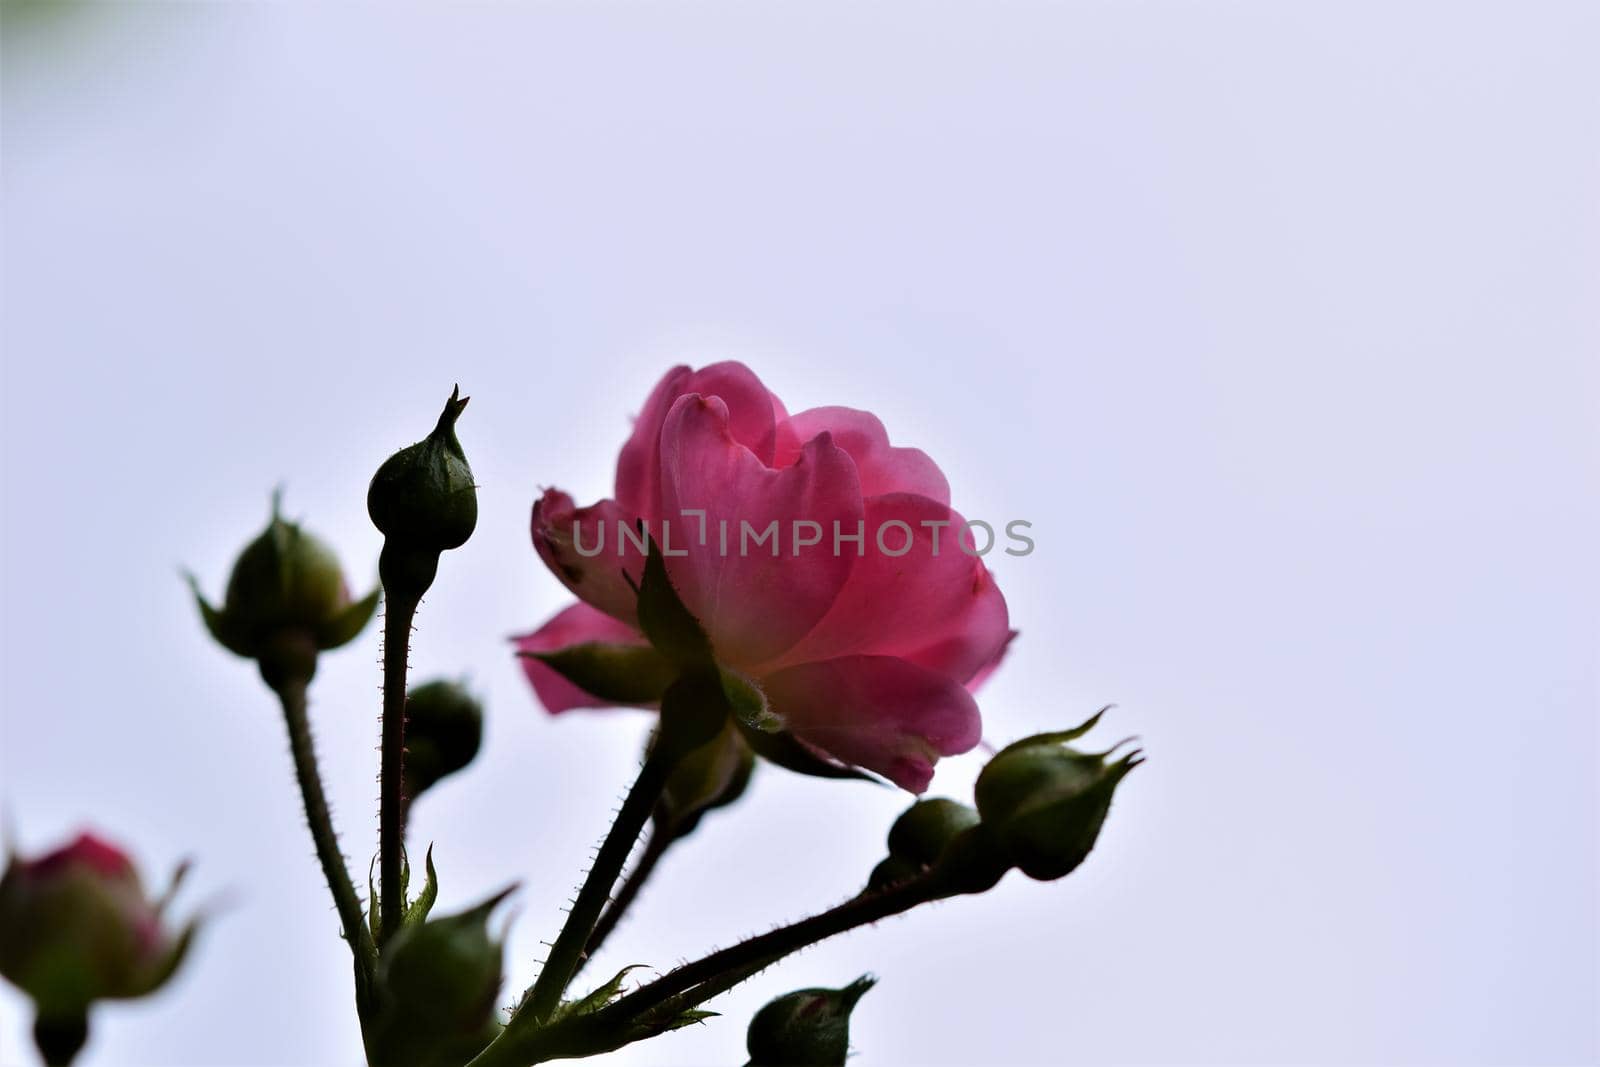 Pink rose blossom and green buds on the bush against a lightsky as background